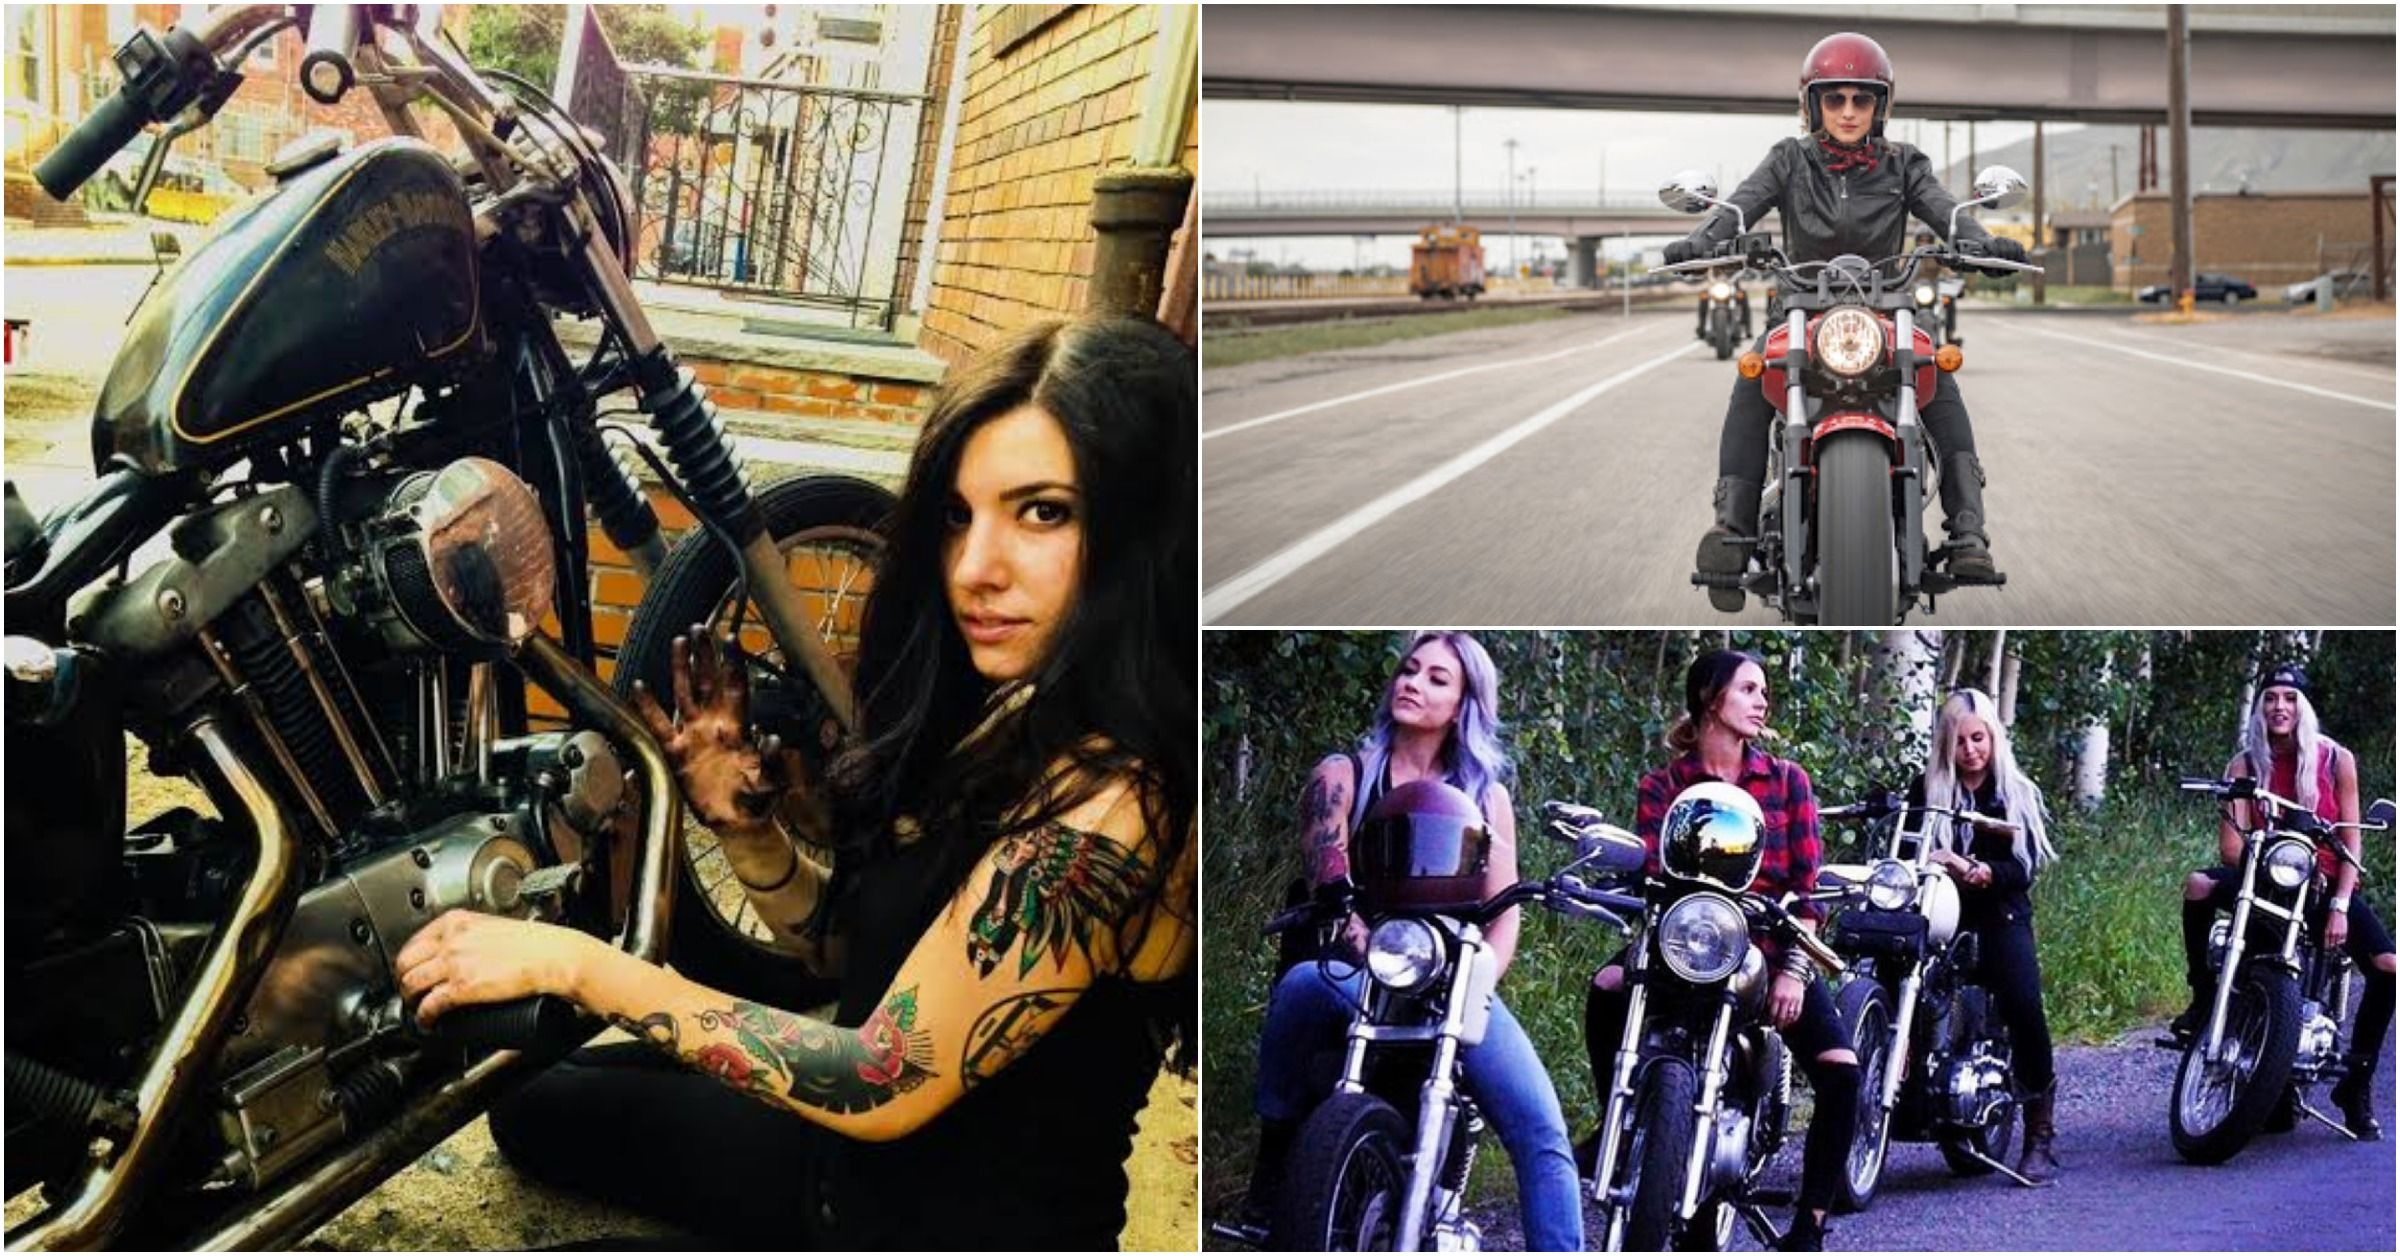 Everything You Need To Know About USA's Female Motorcycle Clubs